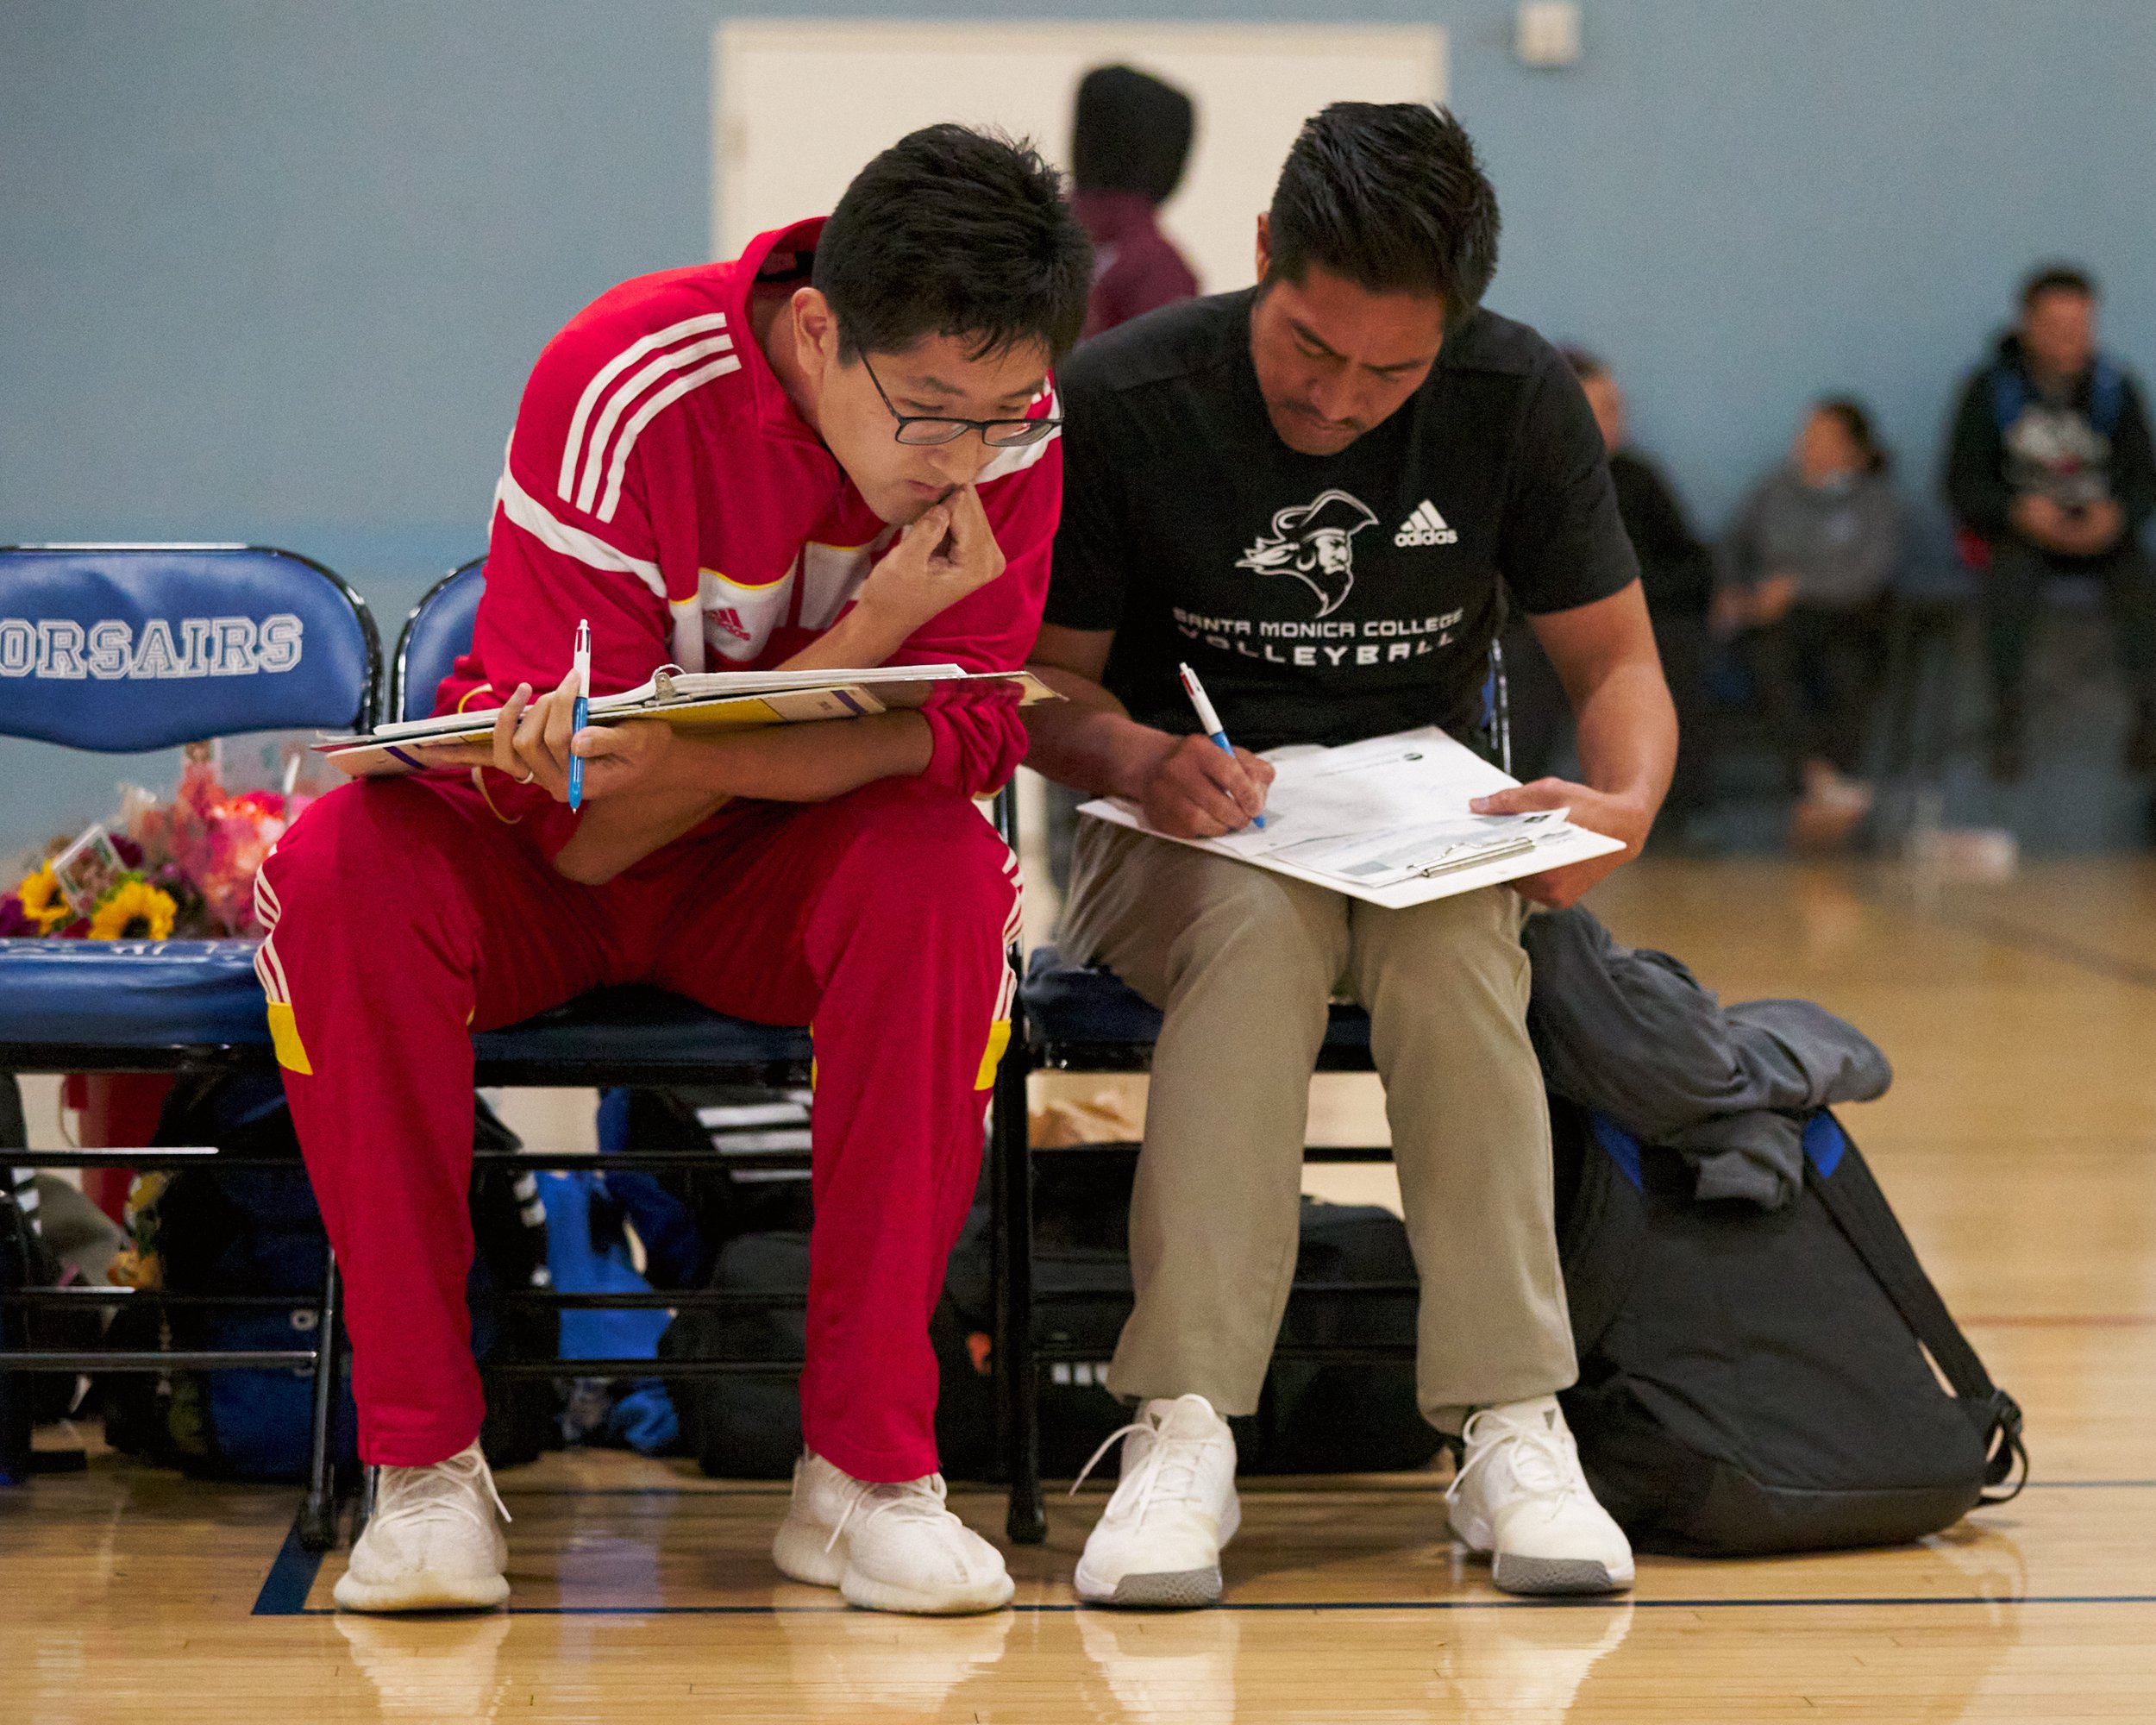  Santa Monica College Corsairs Women's Volleyball Coaches Paddy Pan (Assistant) and Christian Cammayo (Head) during the women's volleyball match against the Glendale Community College Vaqueros on Wednesday, Nov. 9, 2022, at SMC Gym in Santa Monica, C